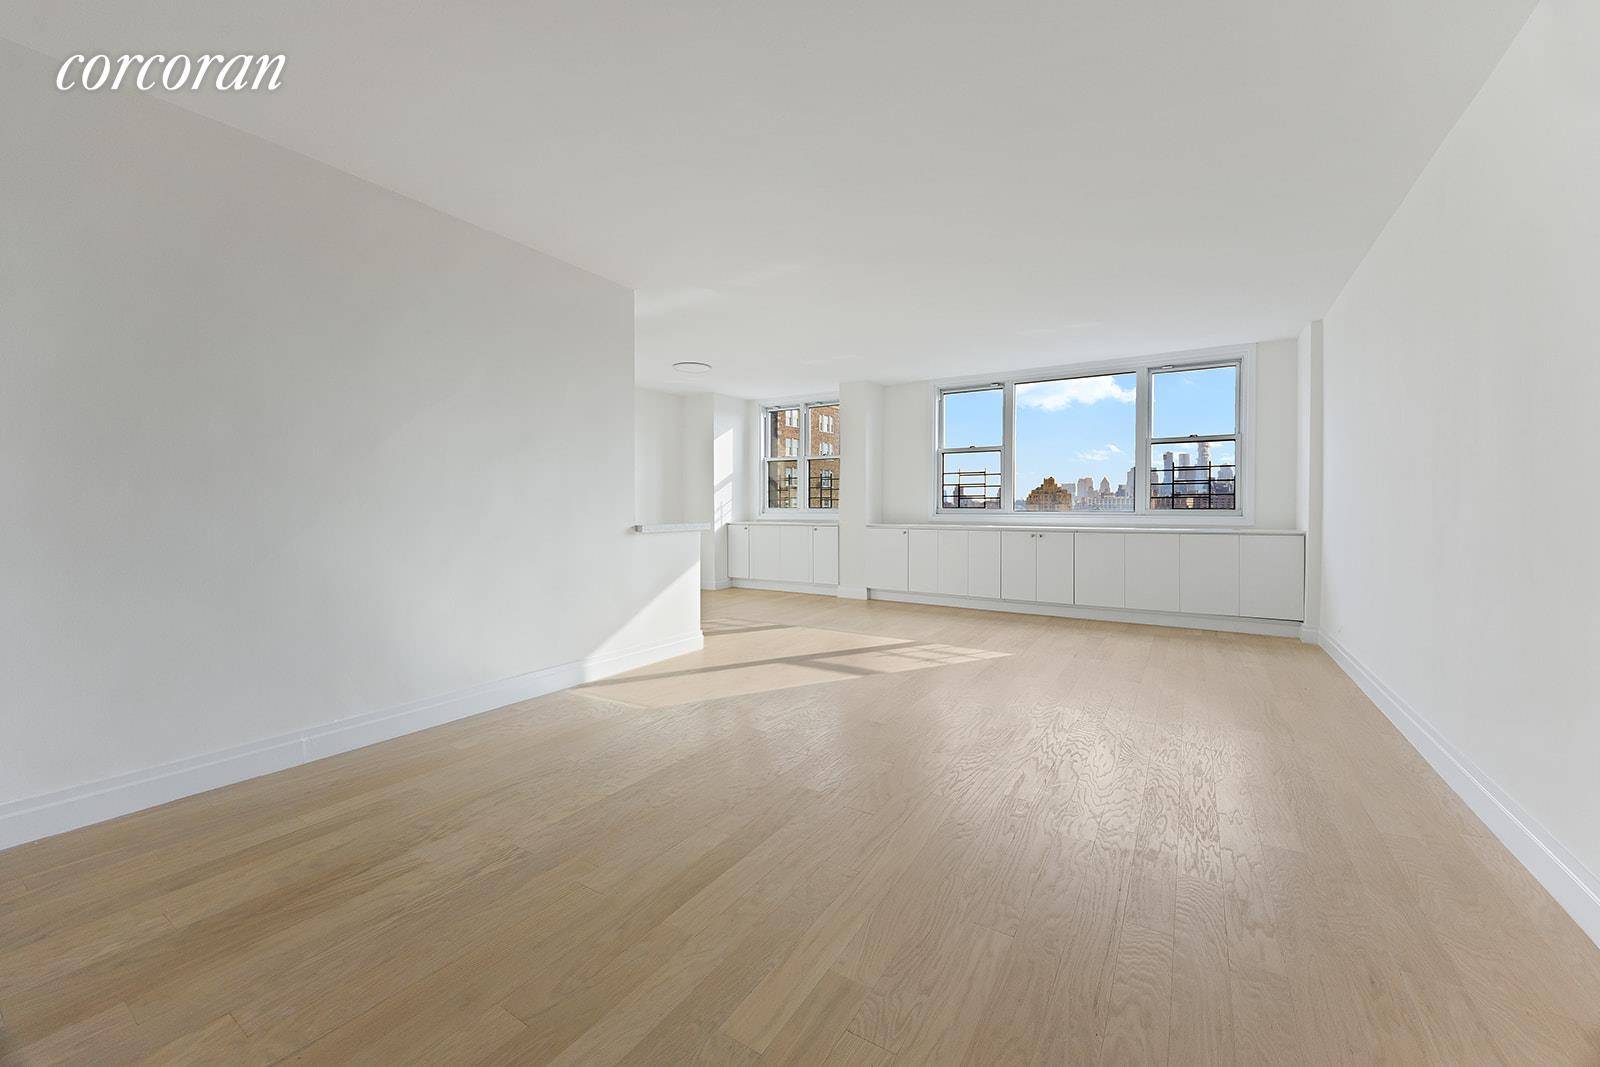 Enjoy the sweeping views of the West Village, the Empire State Building, the Freedom Tower, The Husdon River from this renovated, two bedroom, two bath apartment on the charming and ...